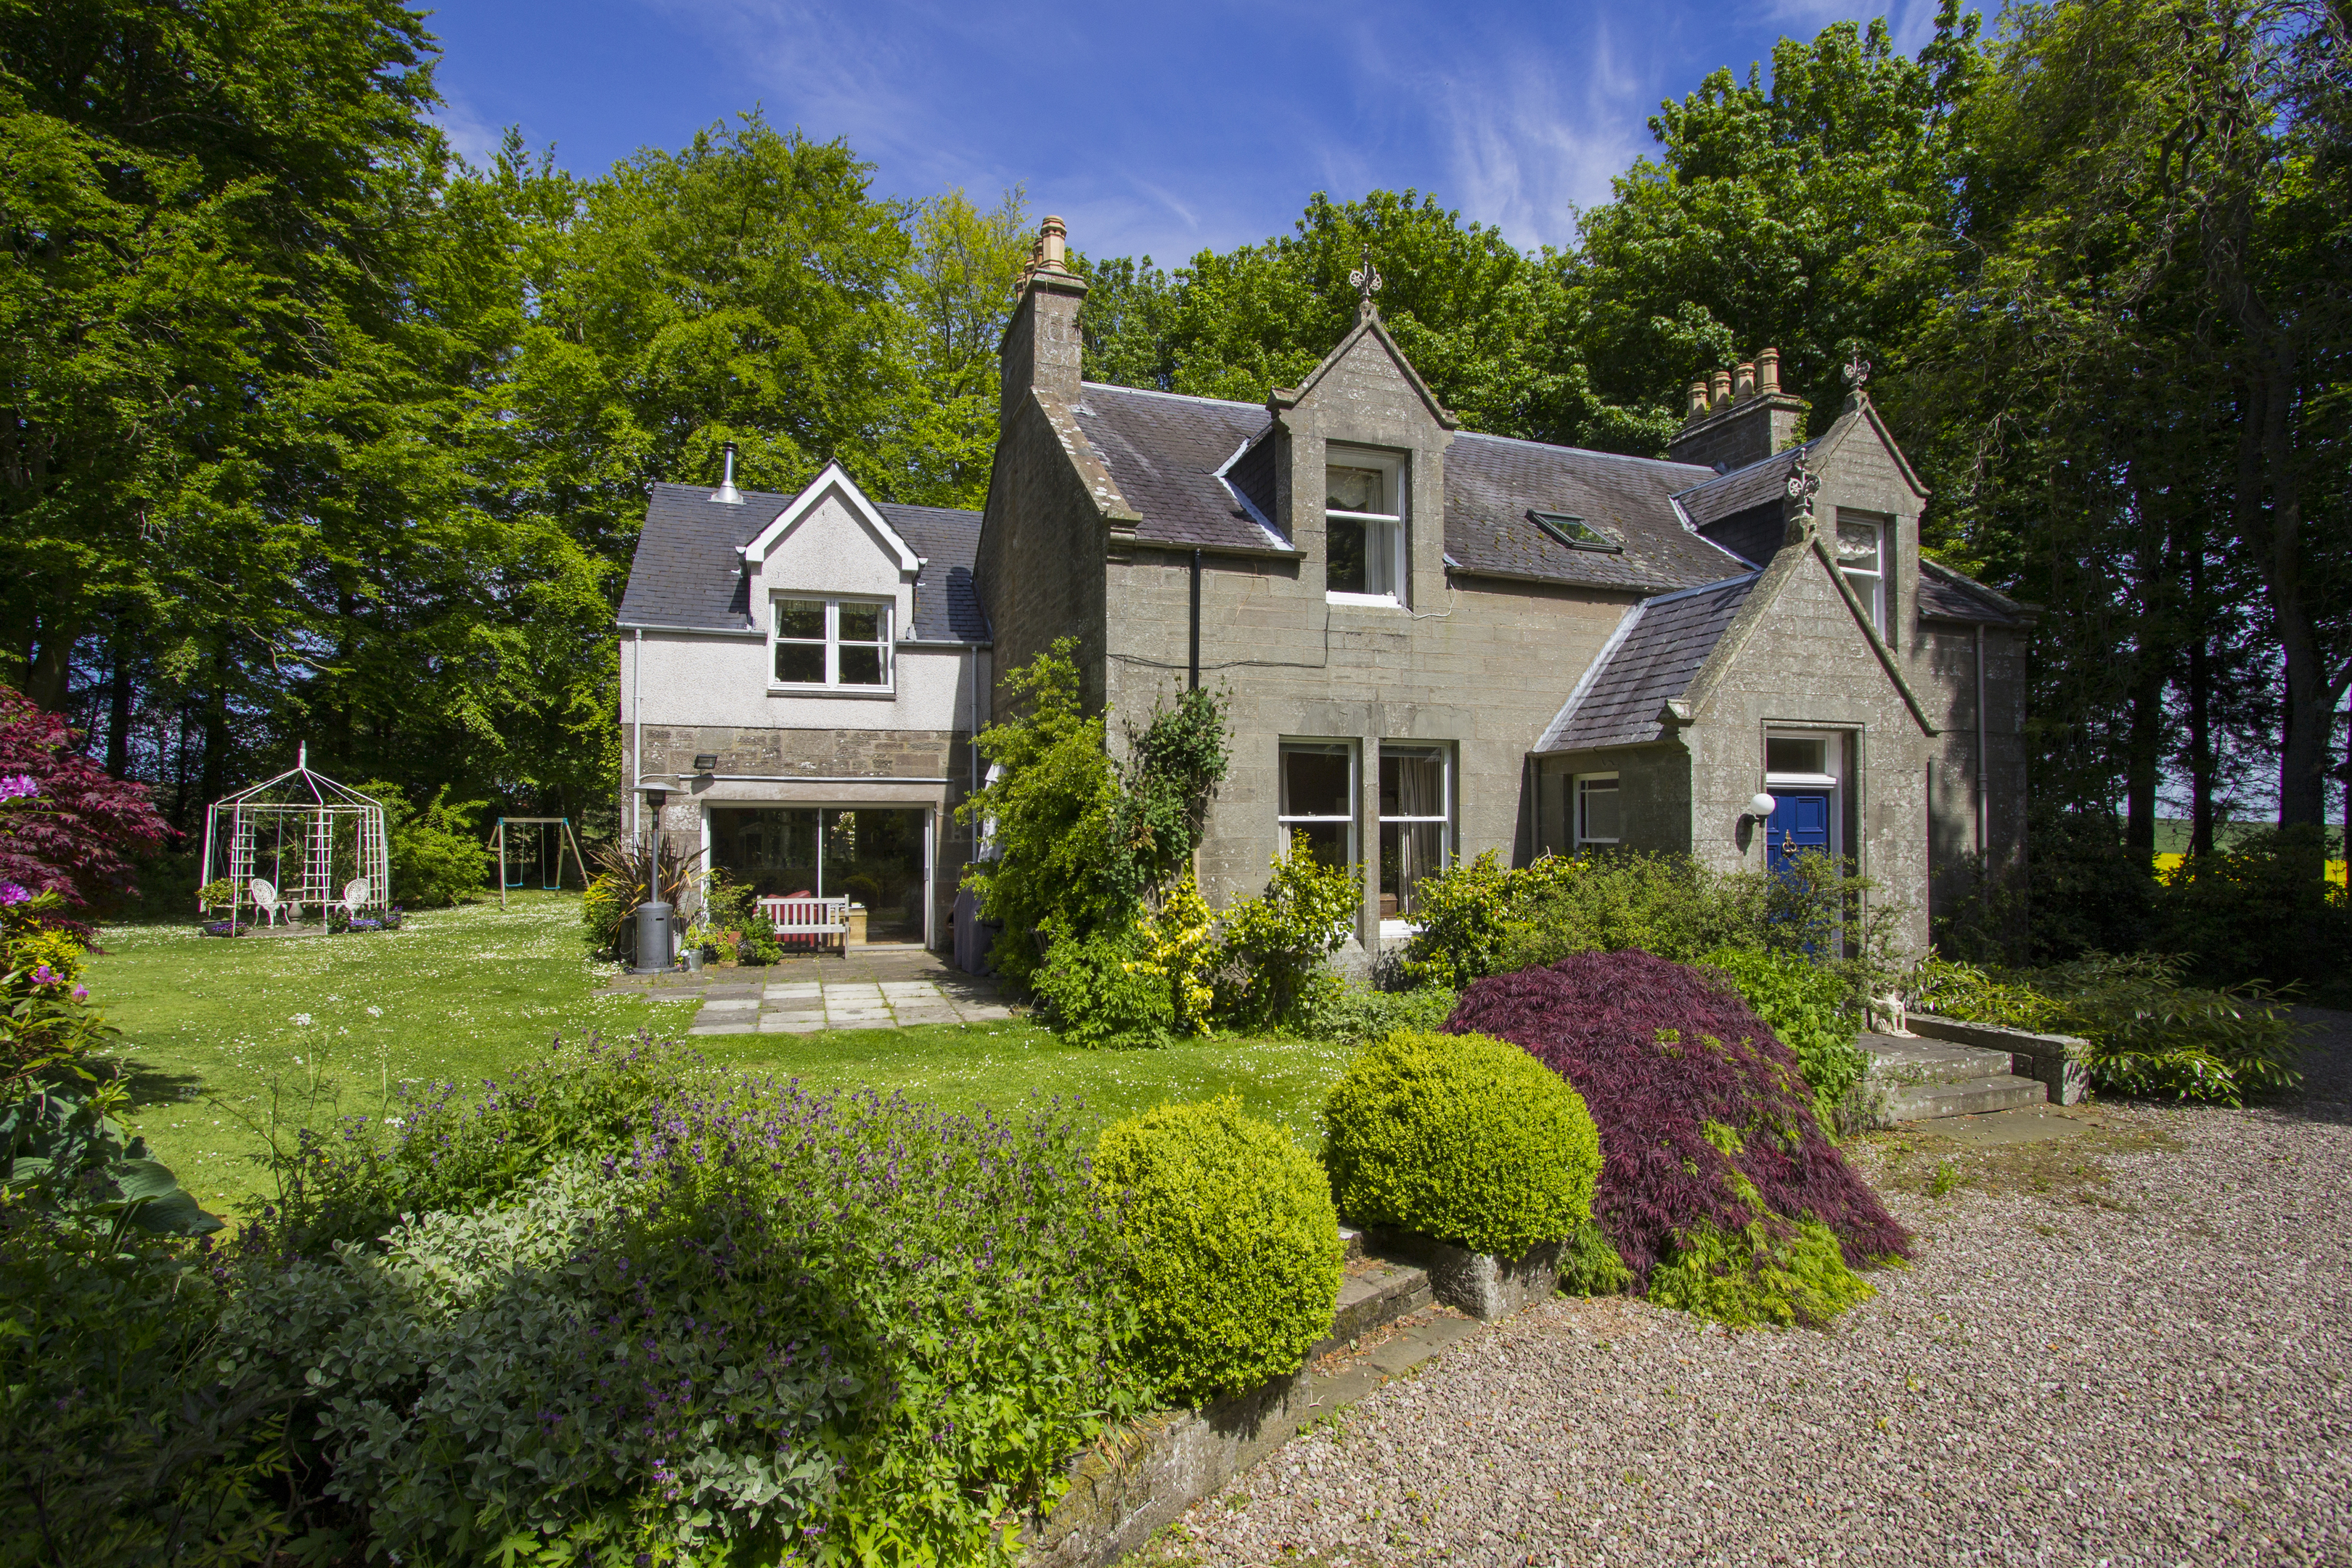 The house is going to auction next month. Image: Online Property Auctions Scotland